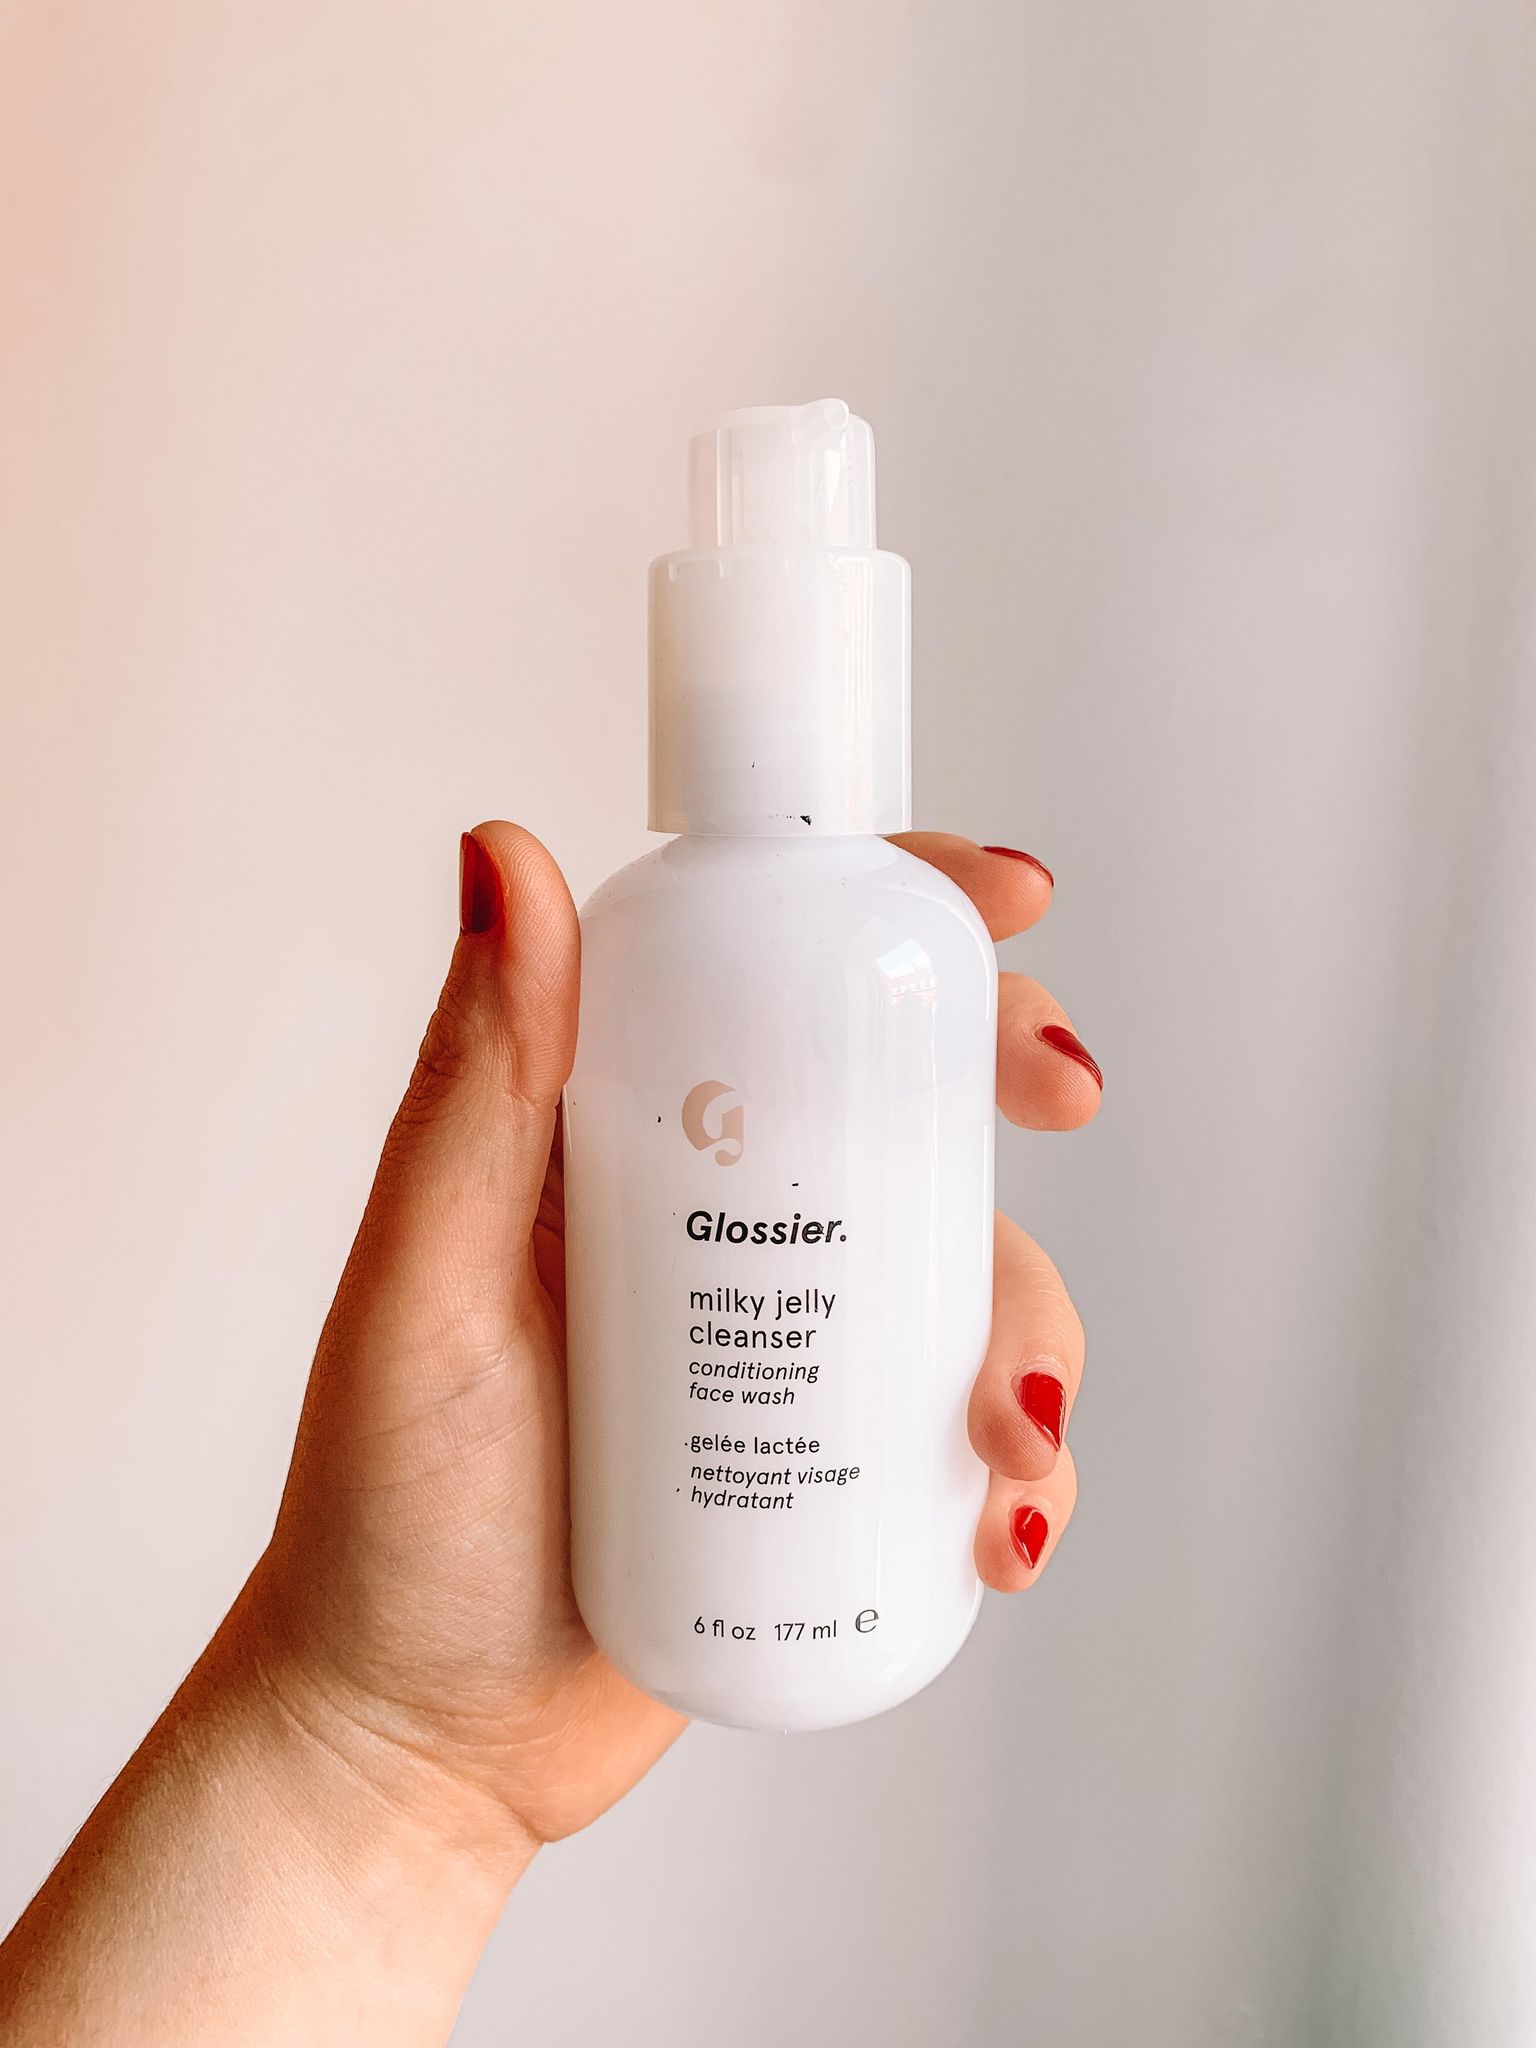 Glossier Facial Cleansing Bottle